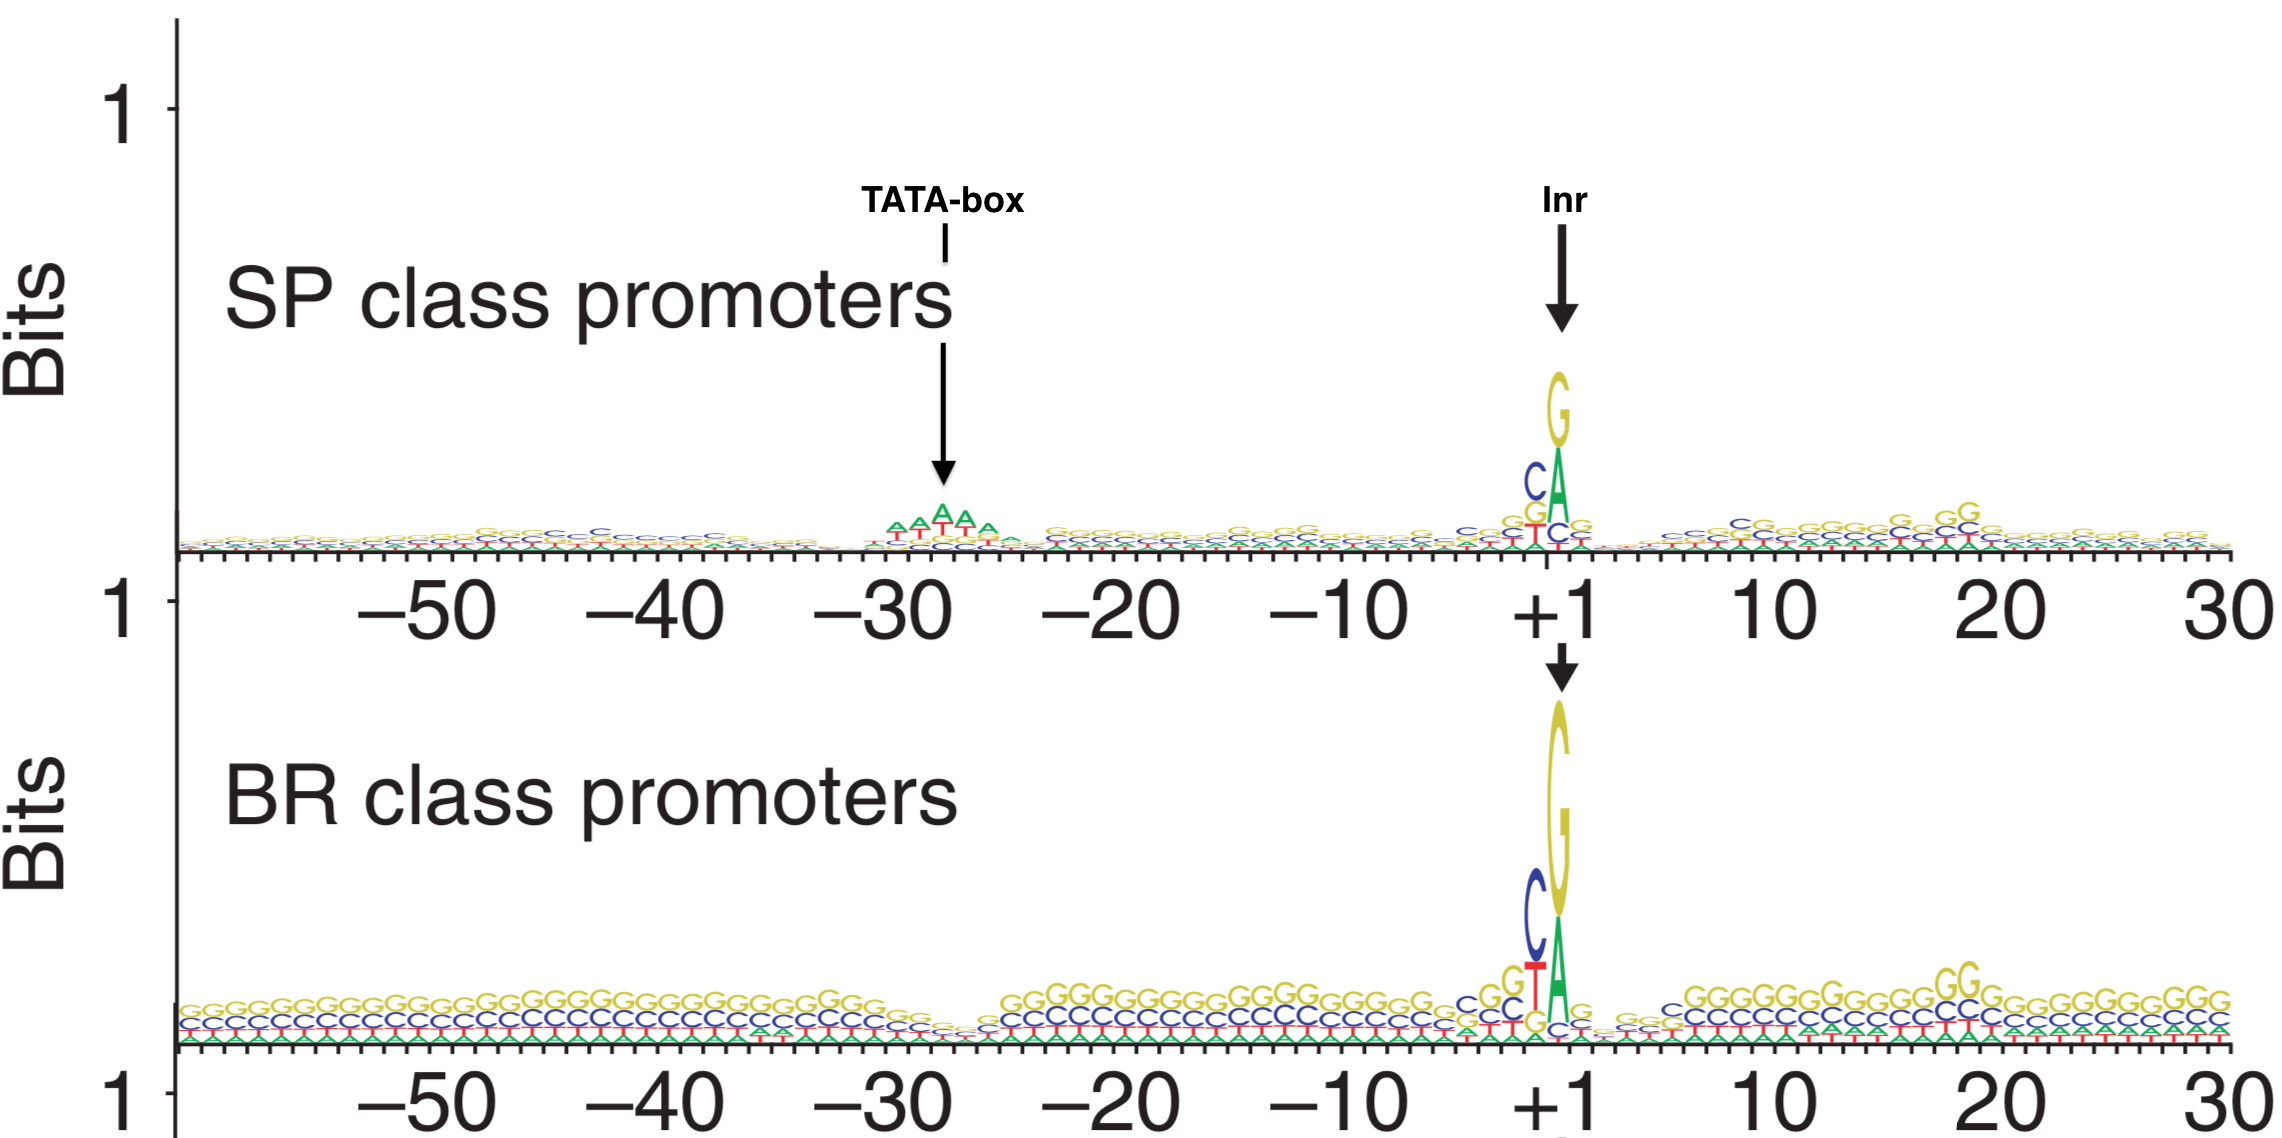 Sequence Logos for Single Predominent Peak (SP) and Broad Peak (BR) promoter types. The position of the TATA-box and Inr are highlighted in the SP class of promoters. The +1 represents the TSS.